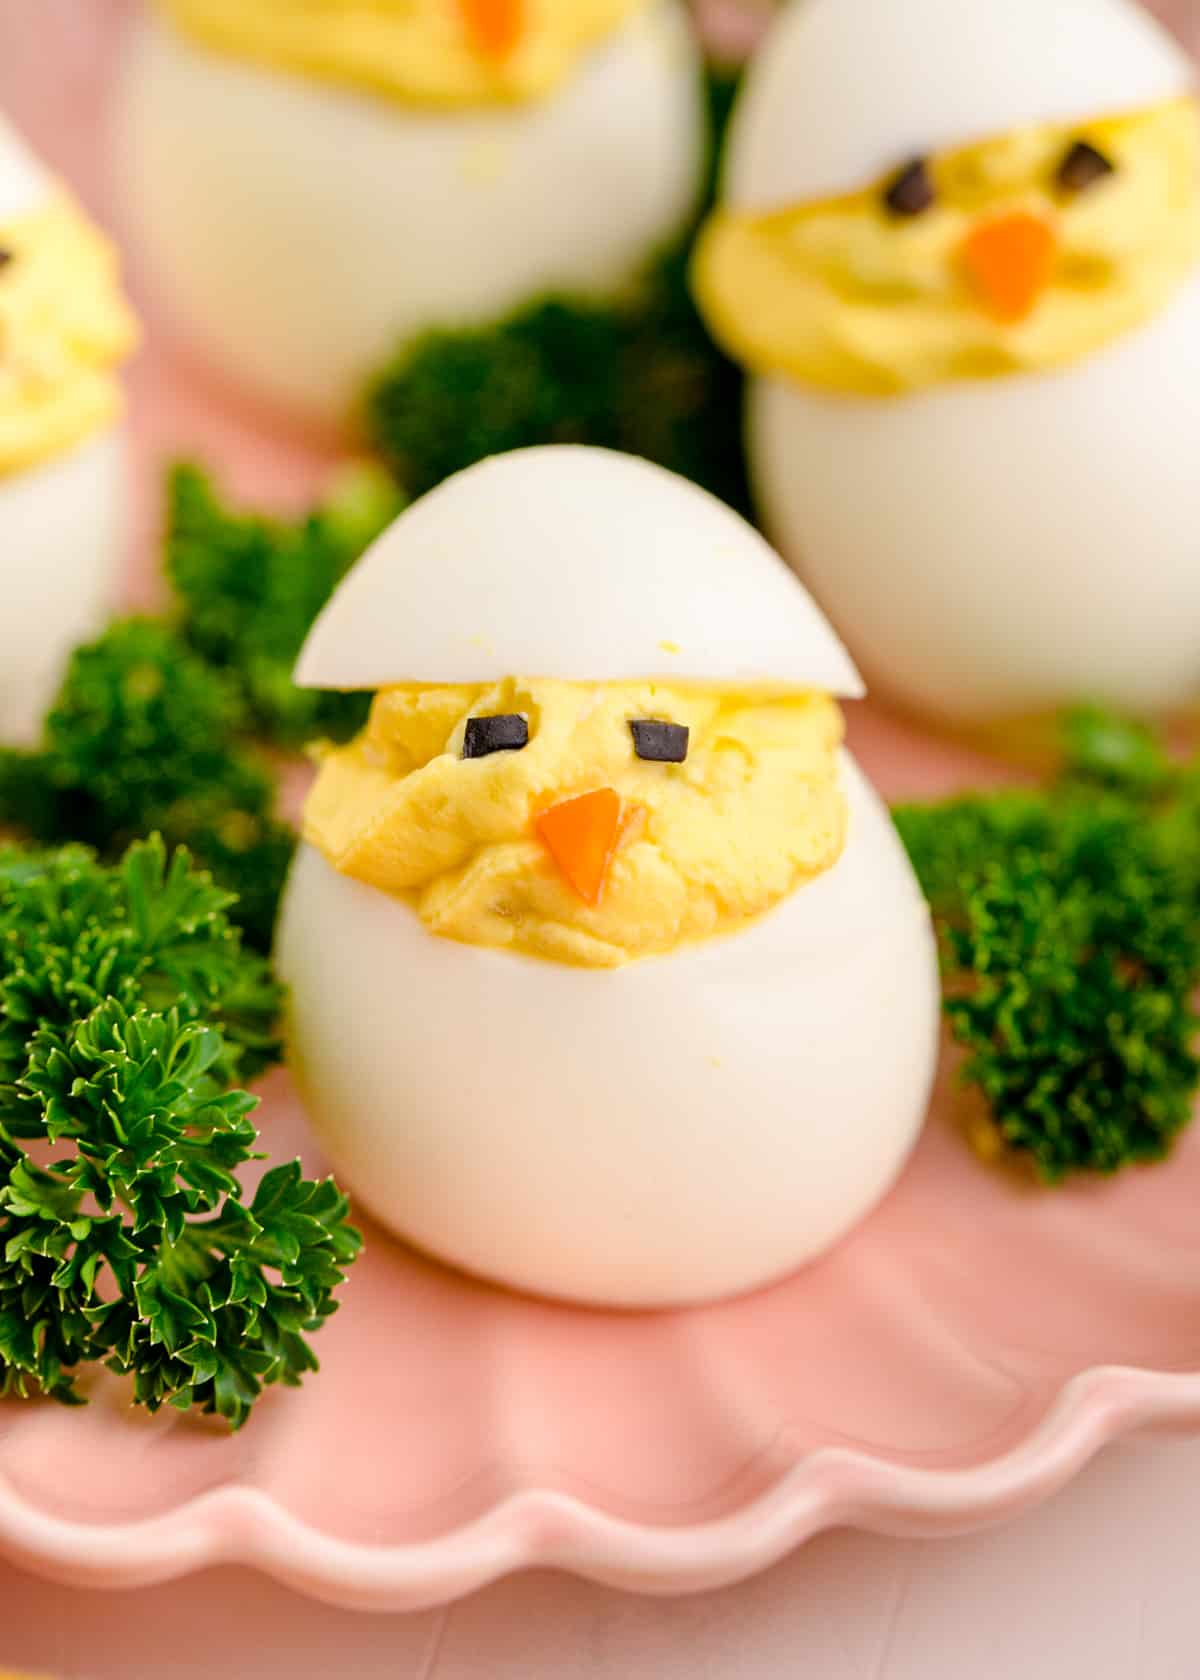 Deviled egg decorated like a little chick with eyes and a nose